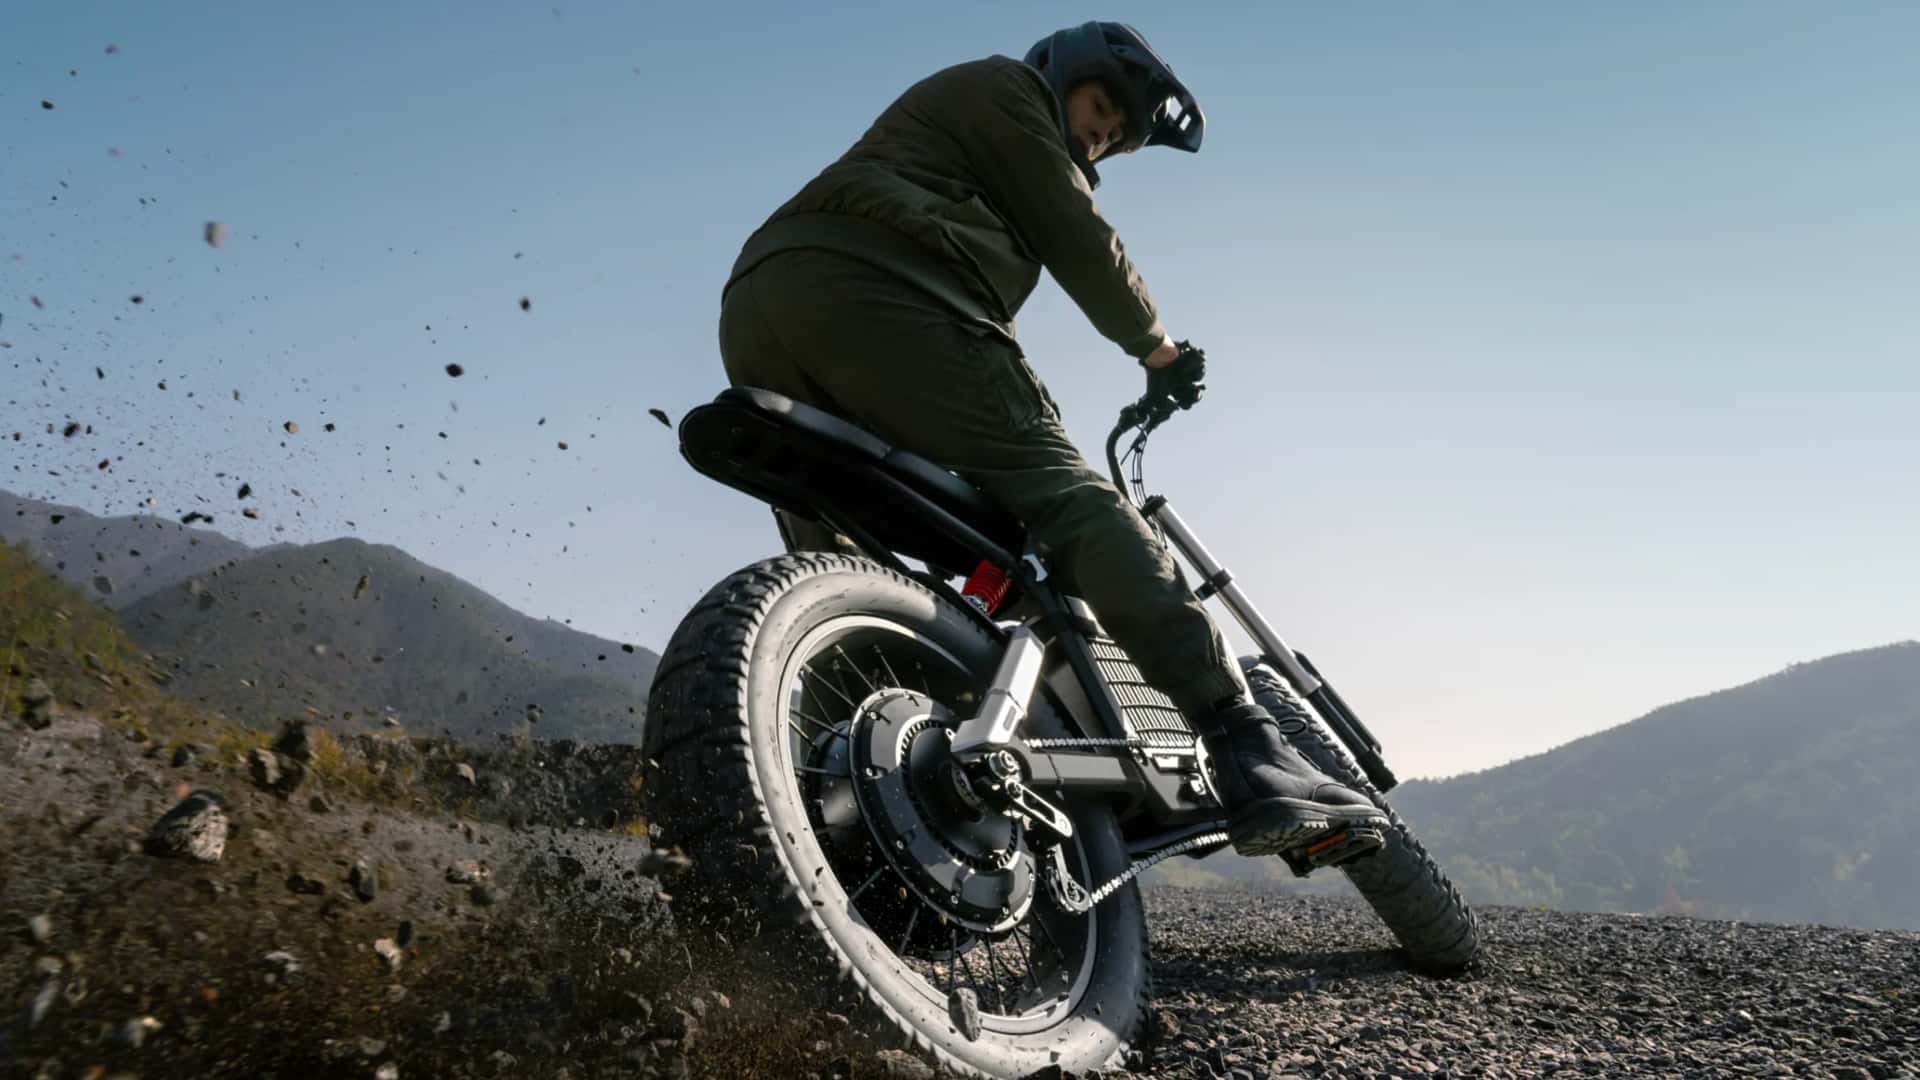 segway-ninebot-just-unveiled-two-powerful-e-bikes-called-xafari-and-xyber%20(3)